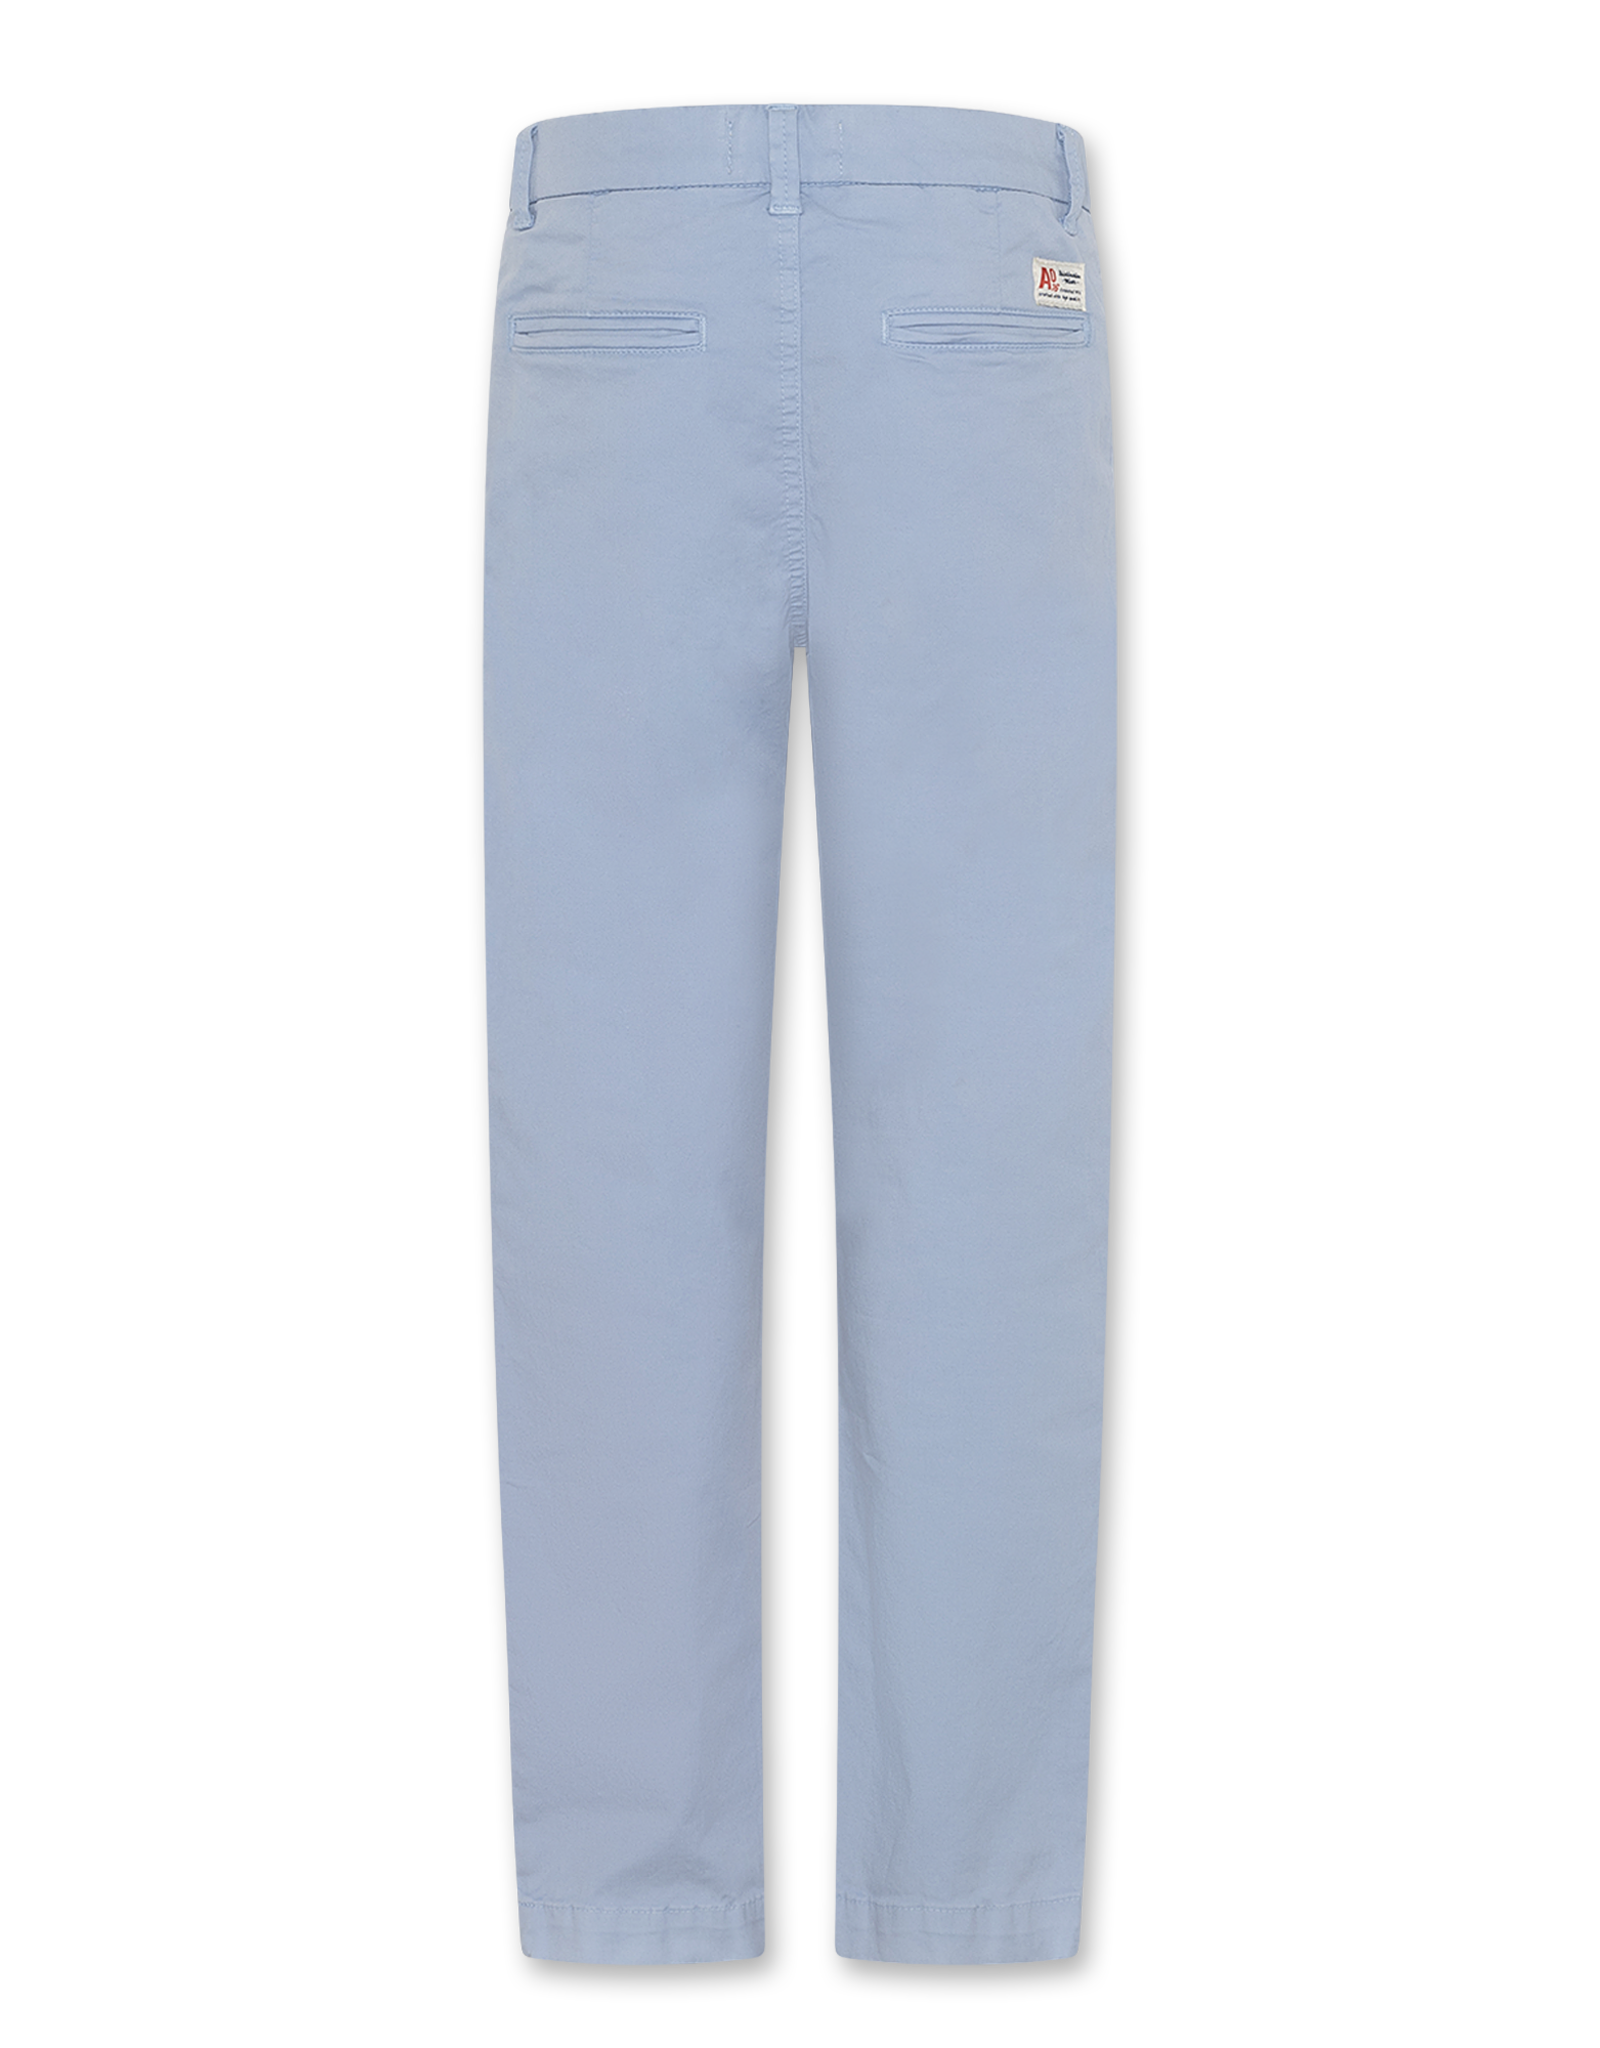 AMERICAN OUTFITTERS Ao76 Barry chino pants sky blue